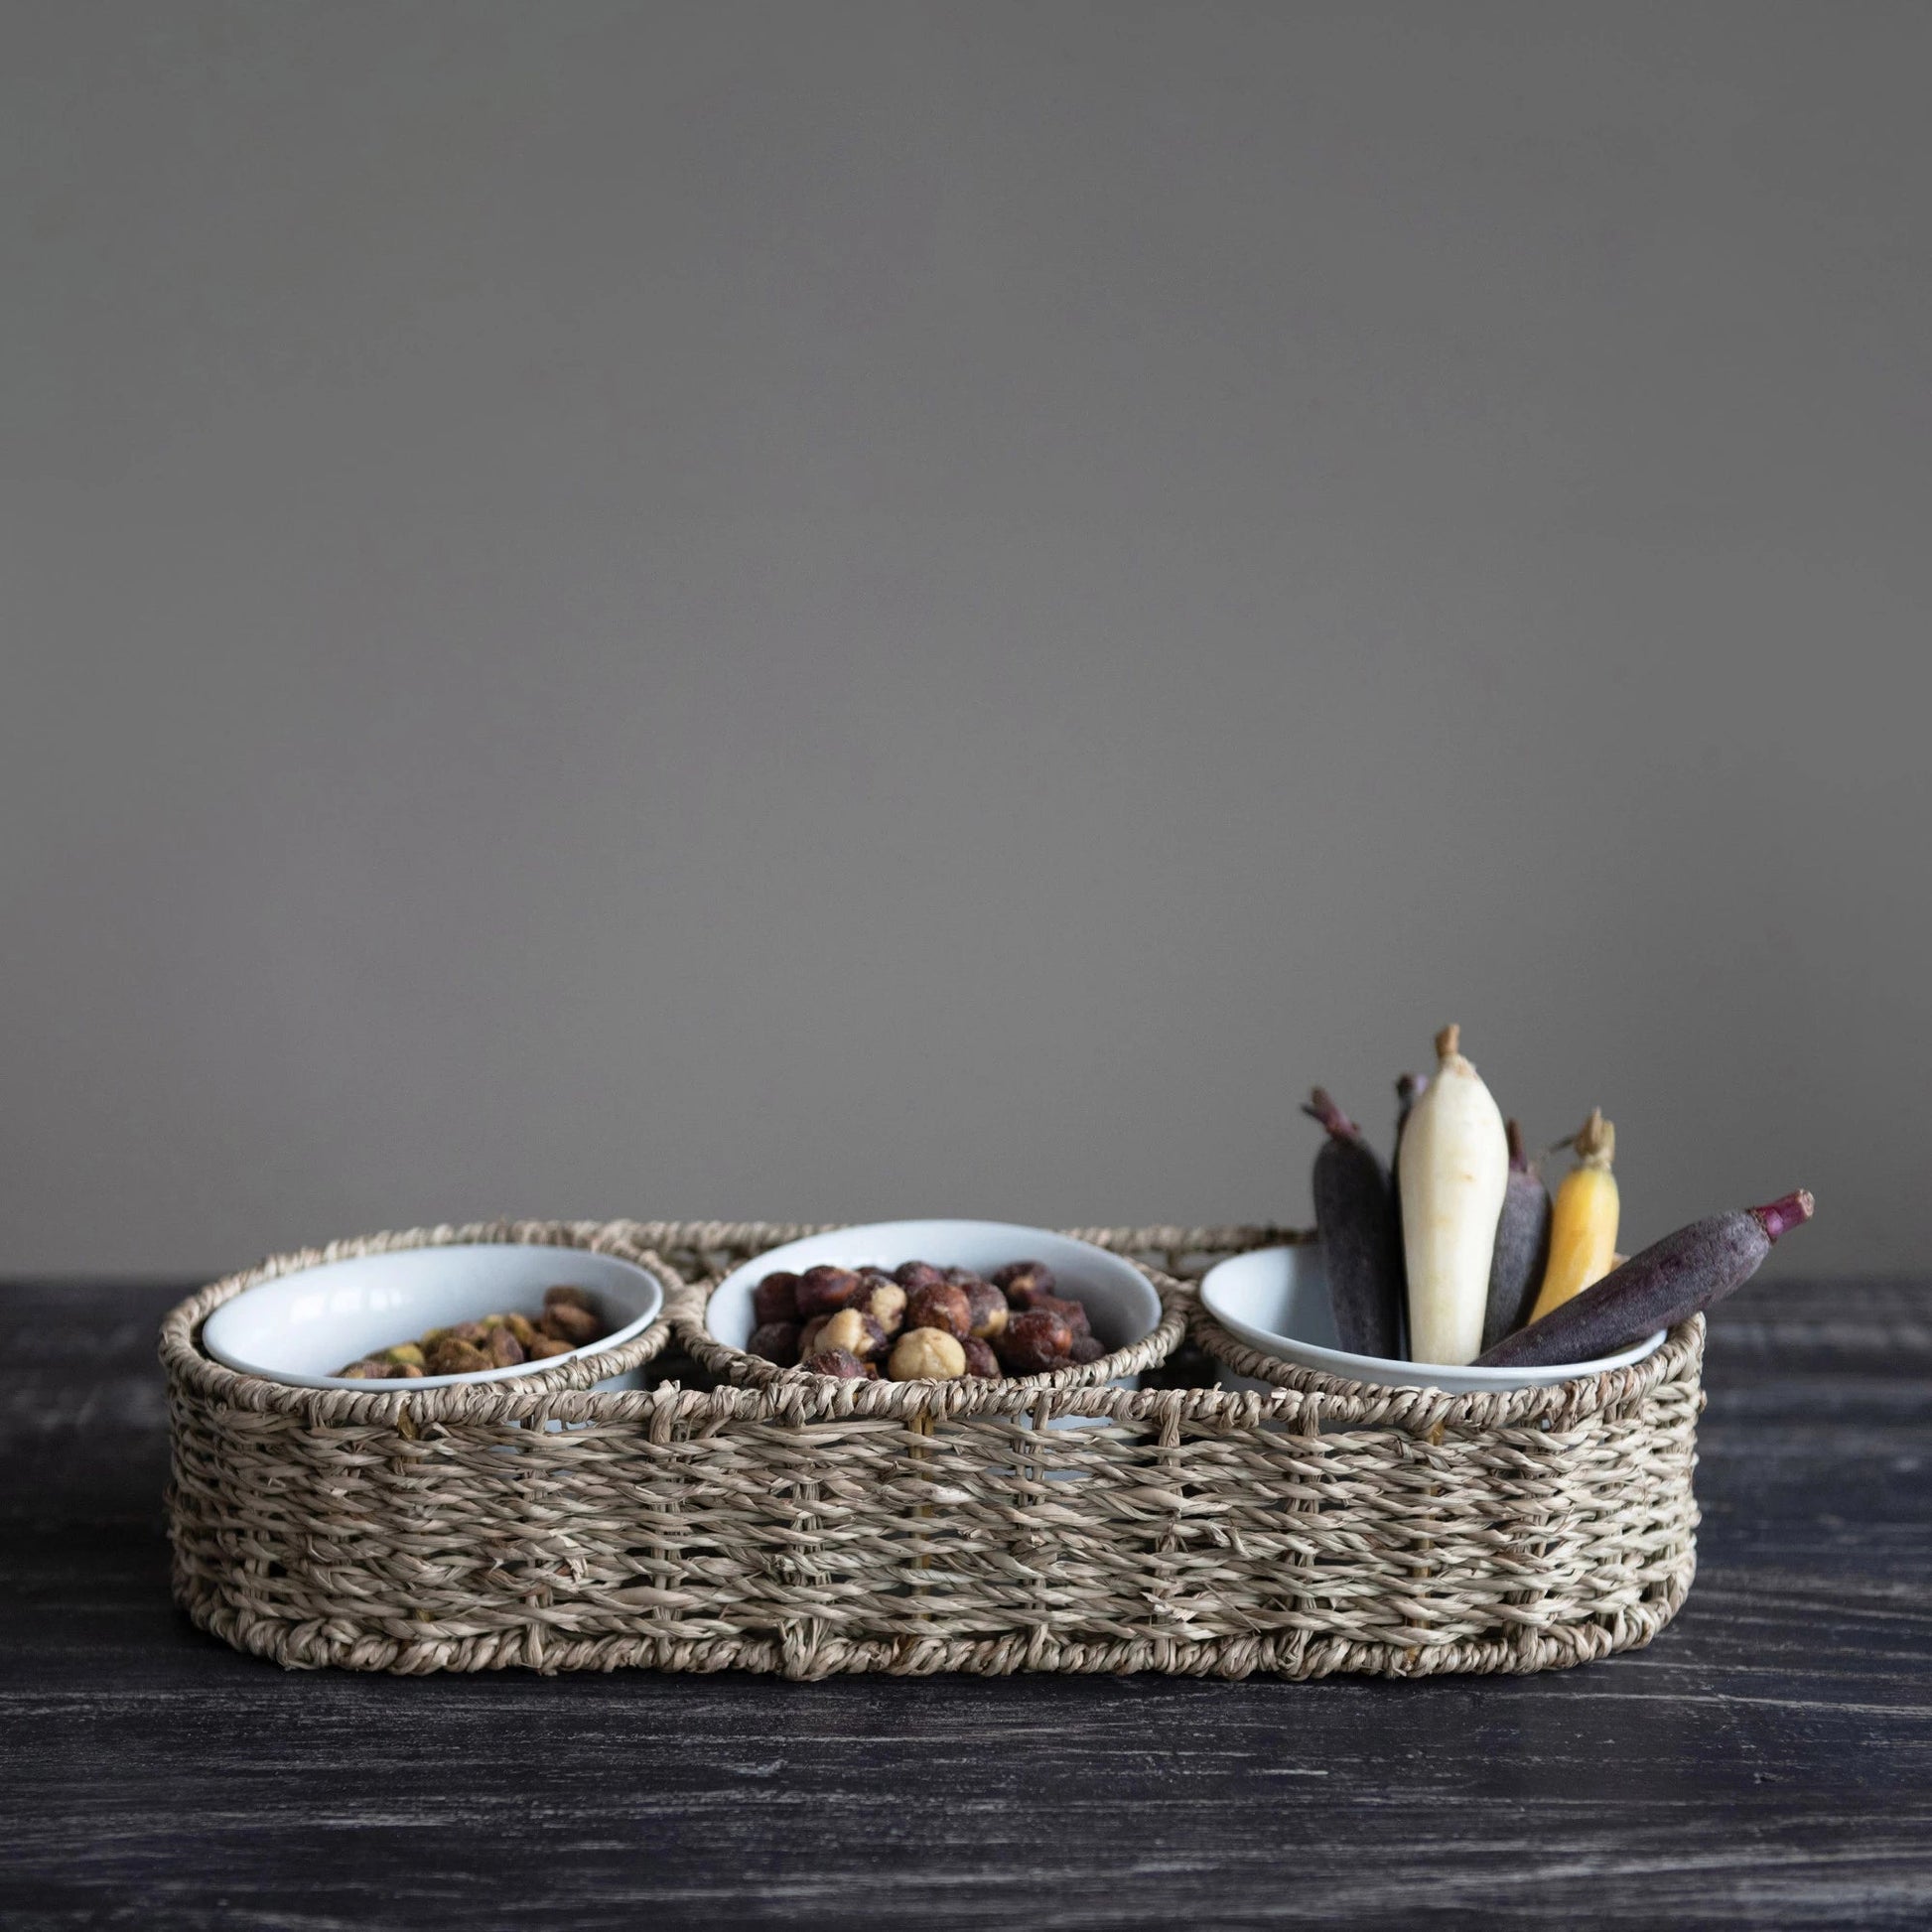 Seagrass Chip & Dip Tray